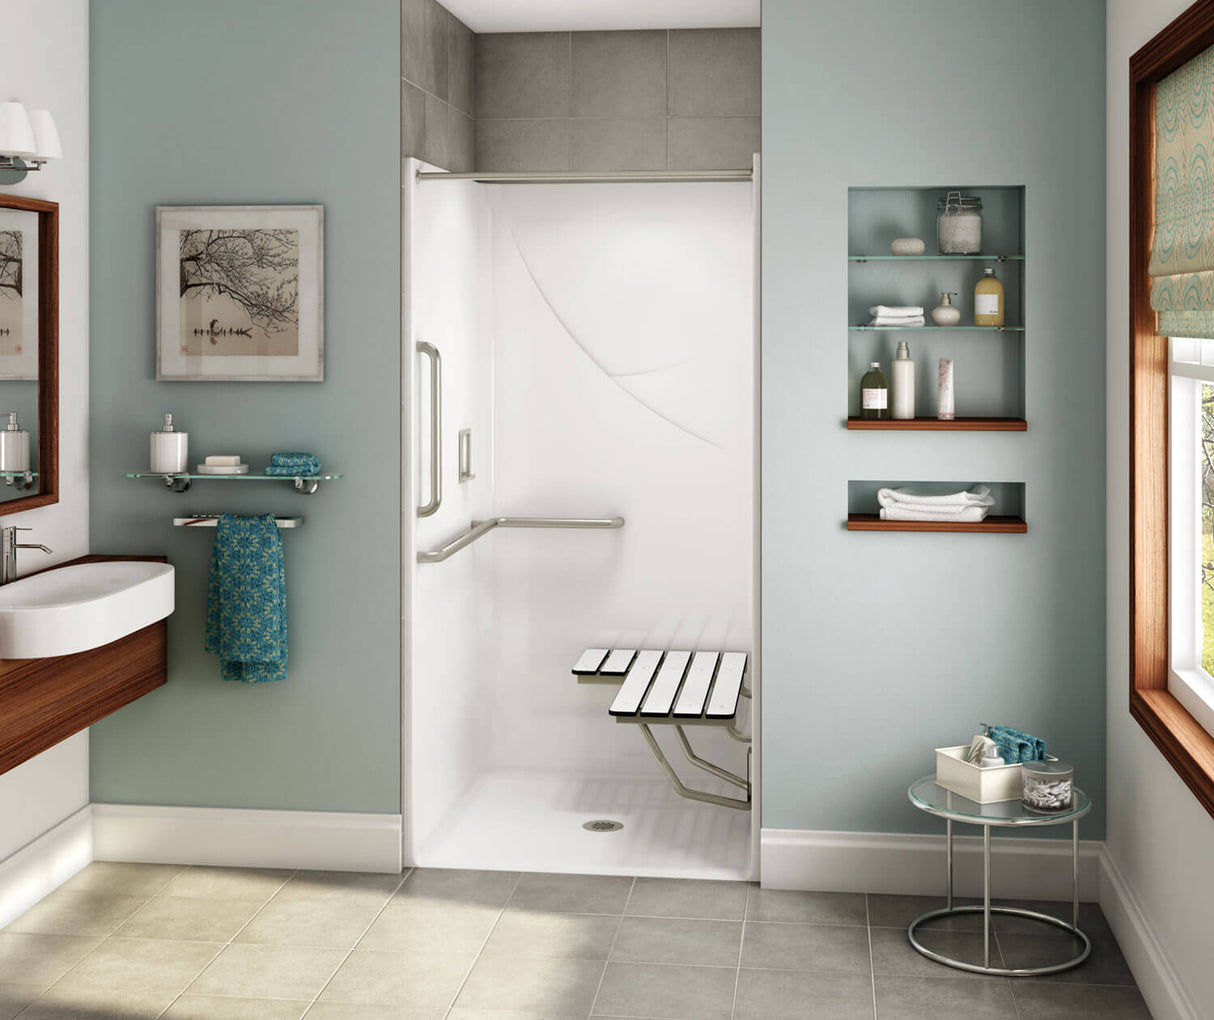 Aker OPS-3636-RS AcrylX Alcove Center Drain One-Piece Shower in Thunder Grey - L-shaped and Vertical Grab Bar and Seat